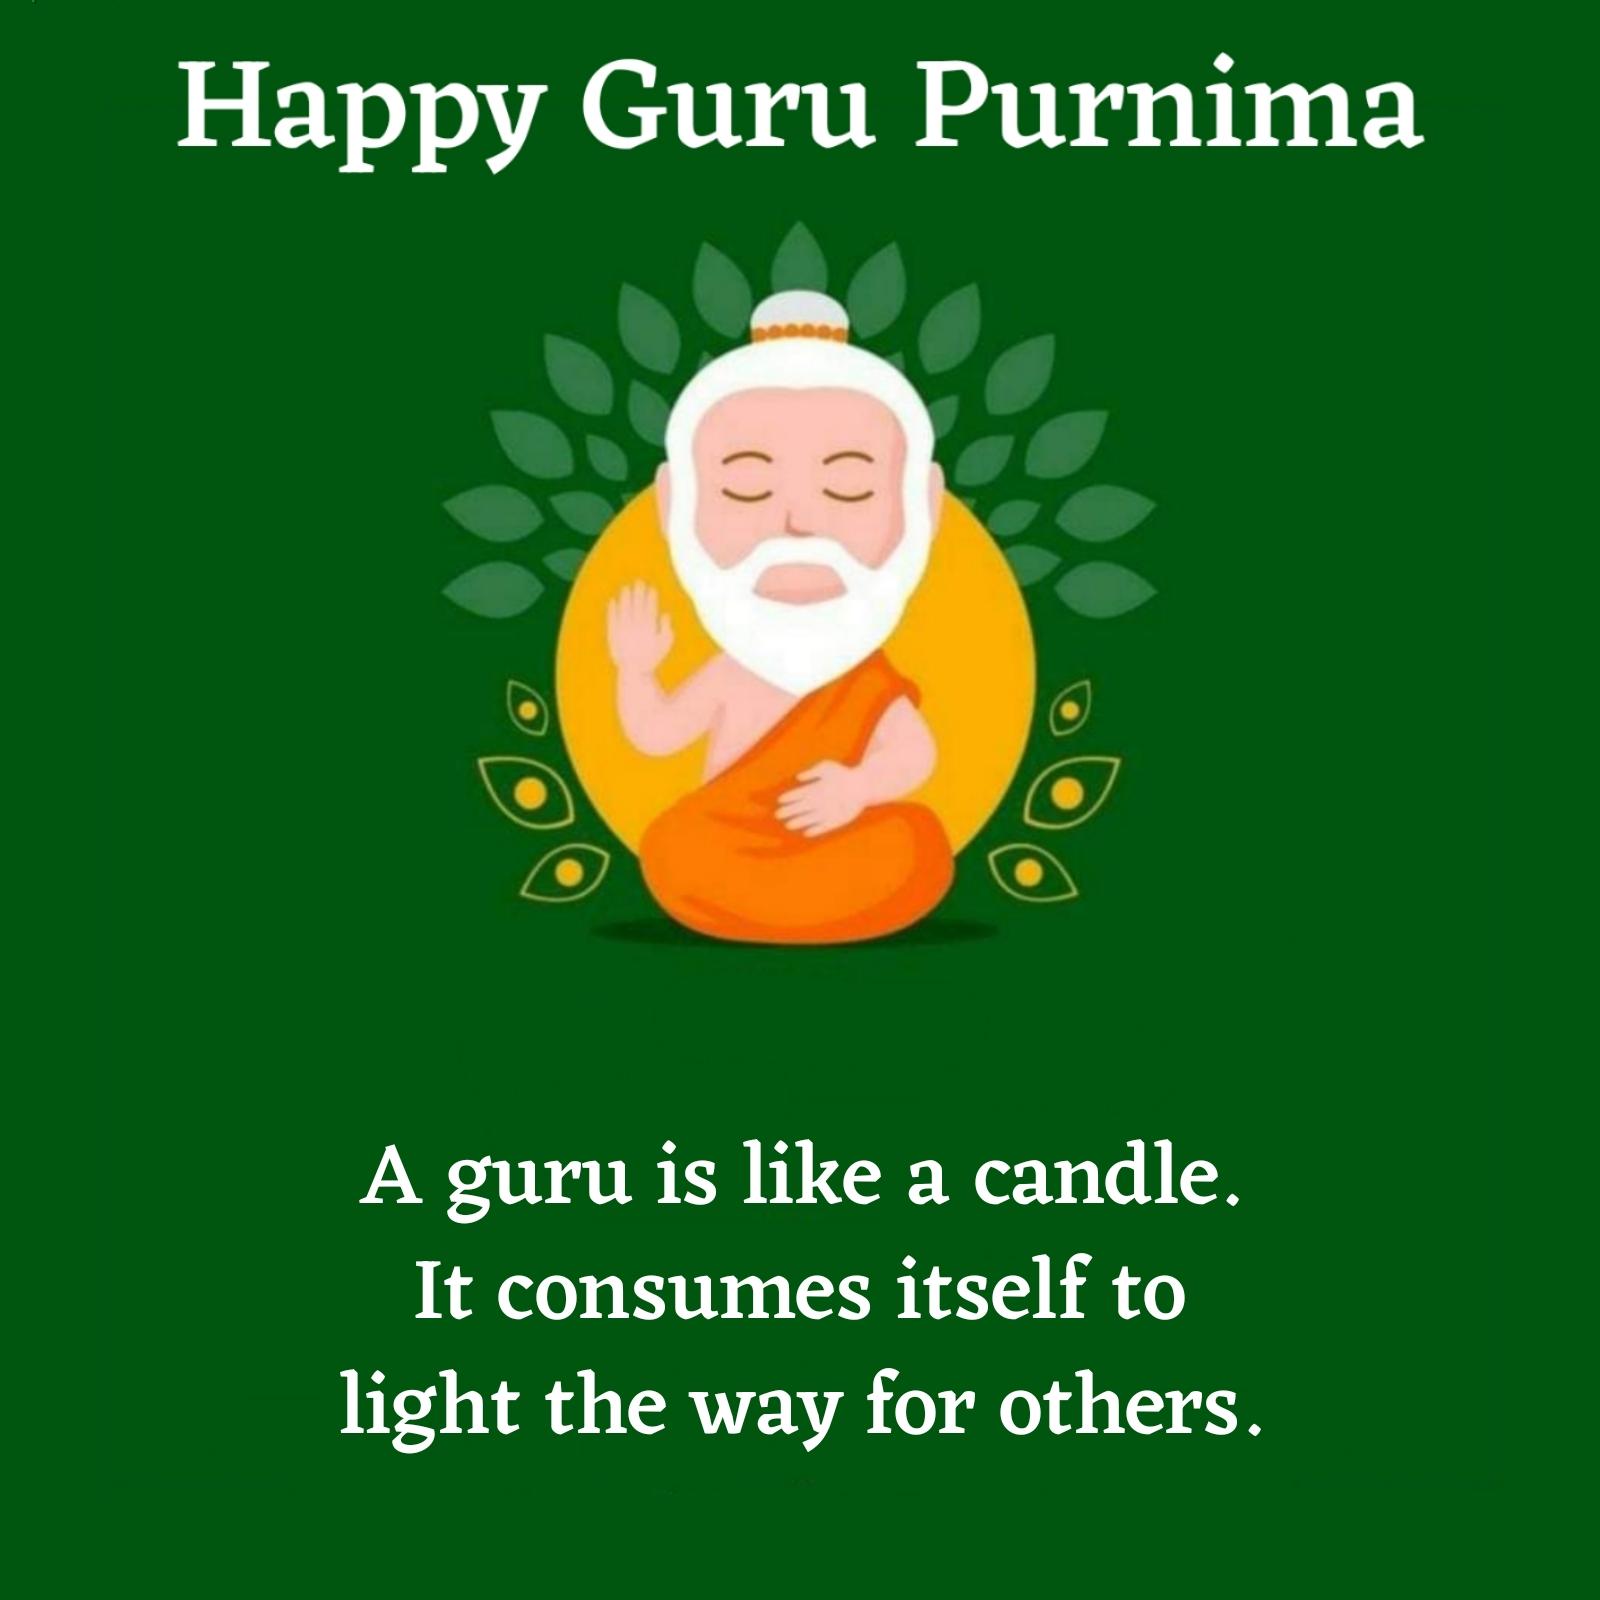 A guru is like a candle It consumes itself to light the way for others